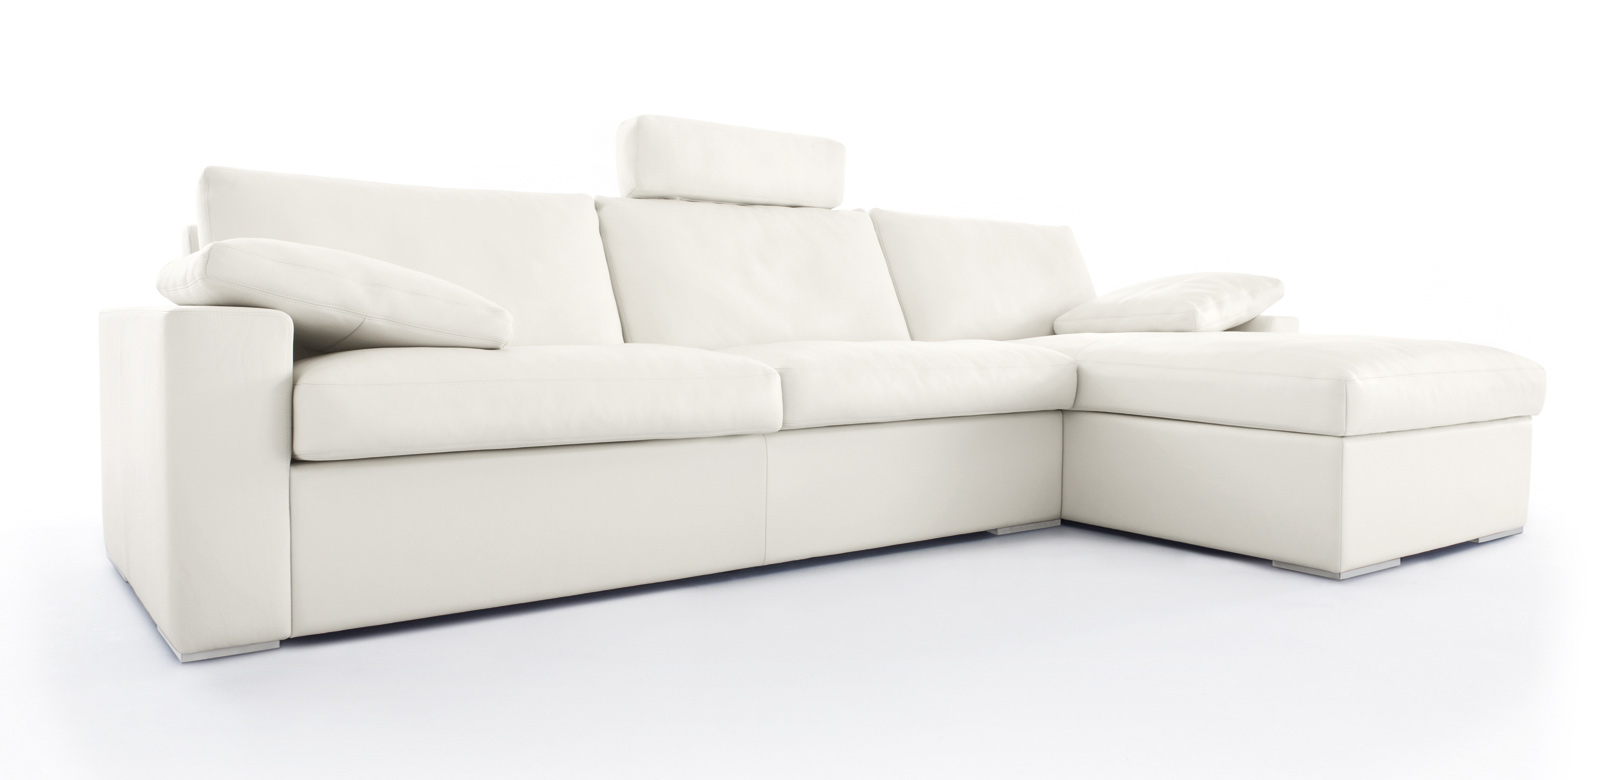 Oblique view CL150 in white leather as longchair combination with cushions and headrests.